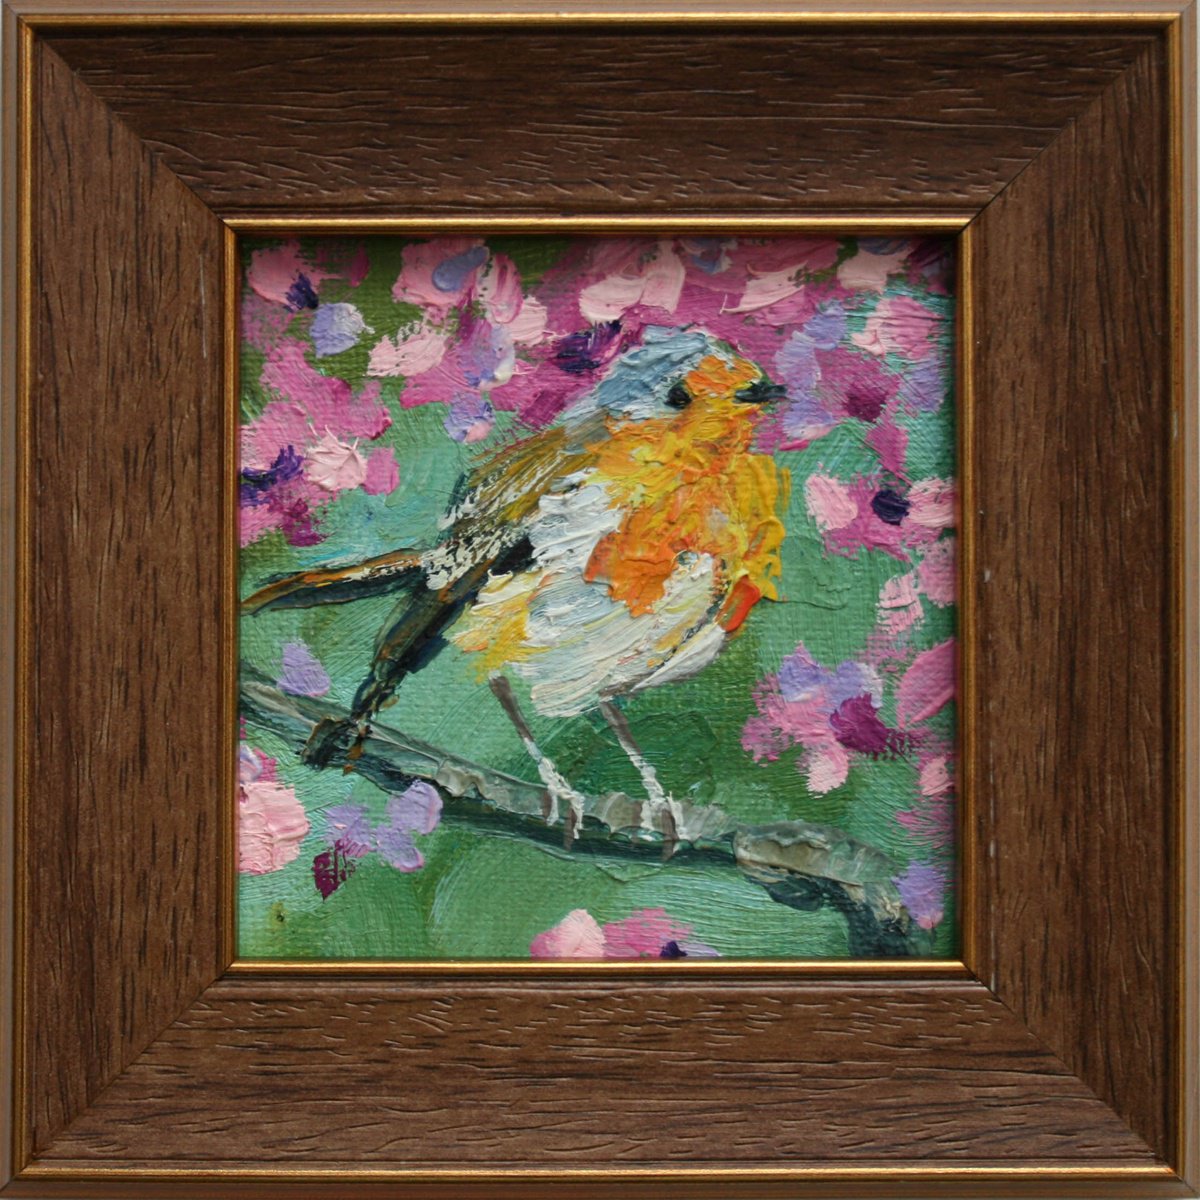 BIRD #7 framed / FROM MY A SERIES OF MINI WORKS BIRDS / ORIGINAL PAINTING by Salana Art Gallery